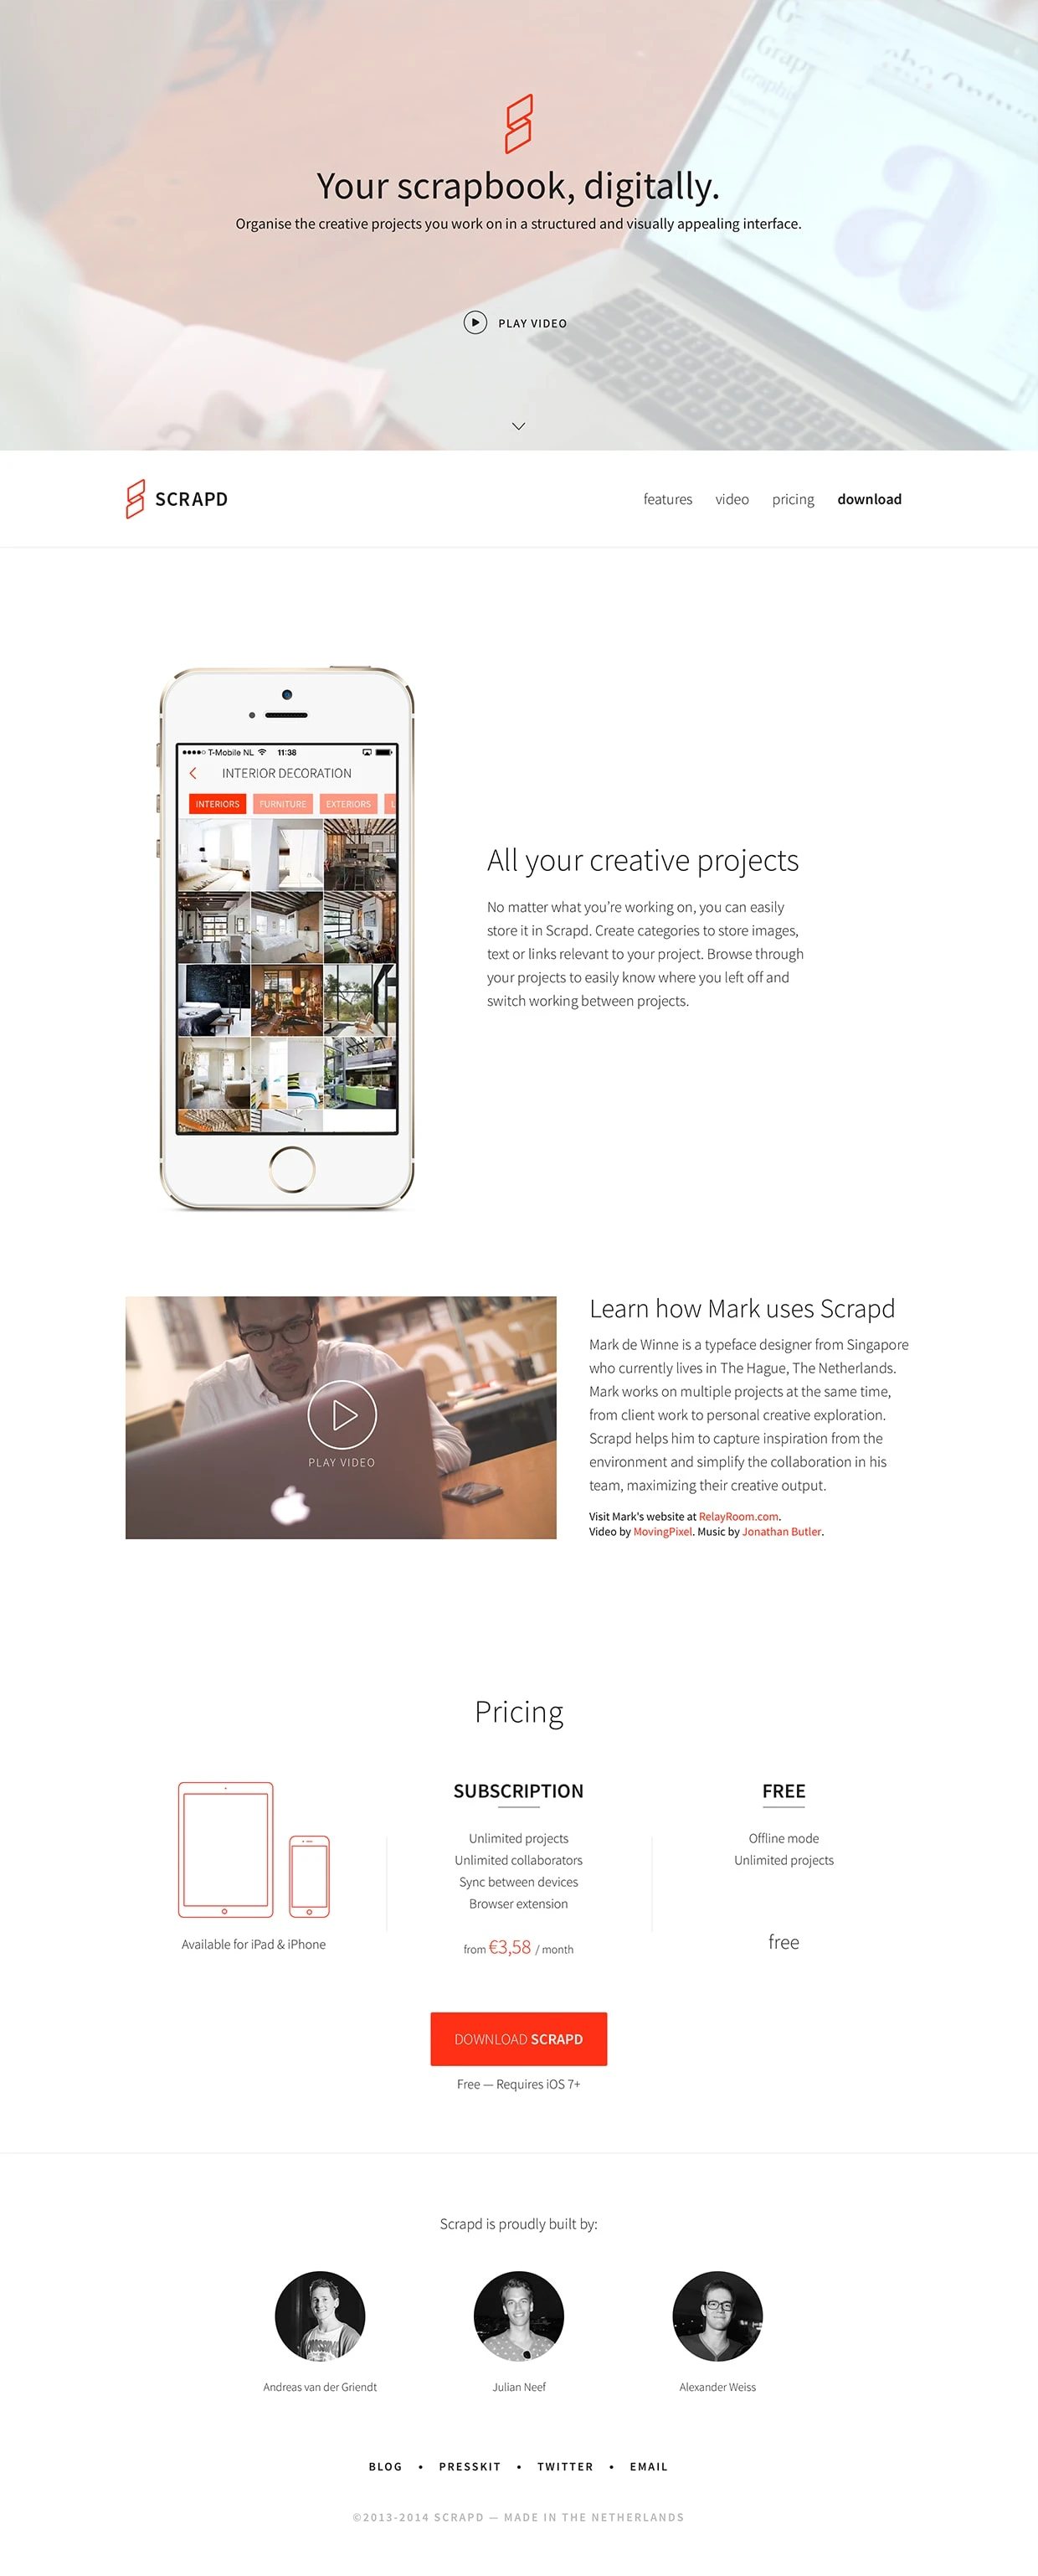 Scrapd Landing Page Example: Organise the creative projects you work on in a structured and visually appealing interface.